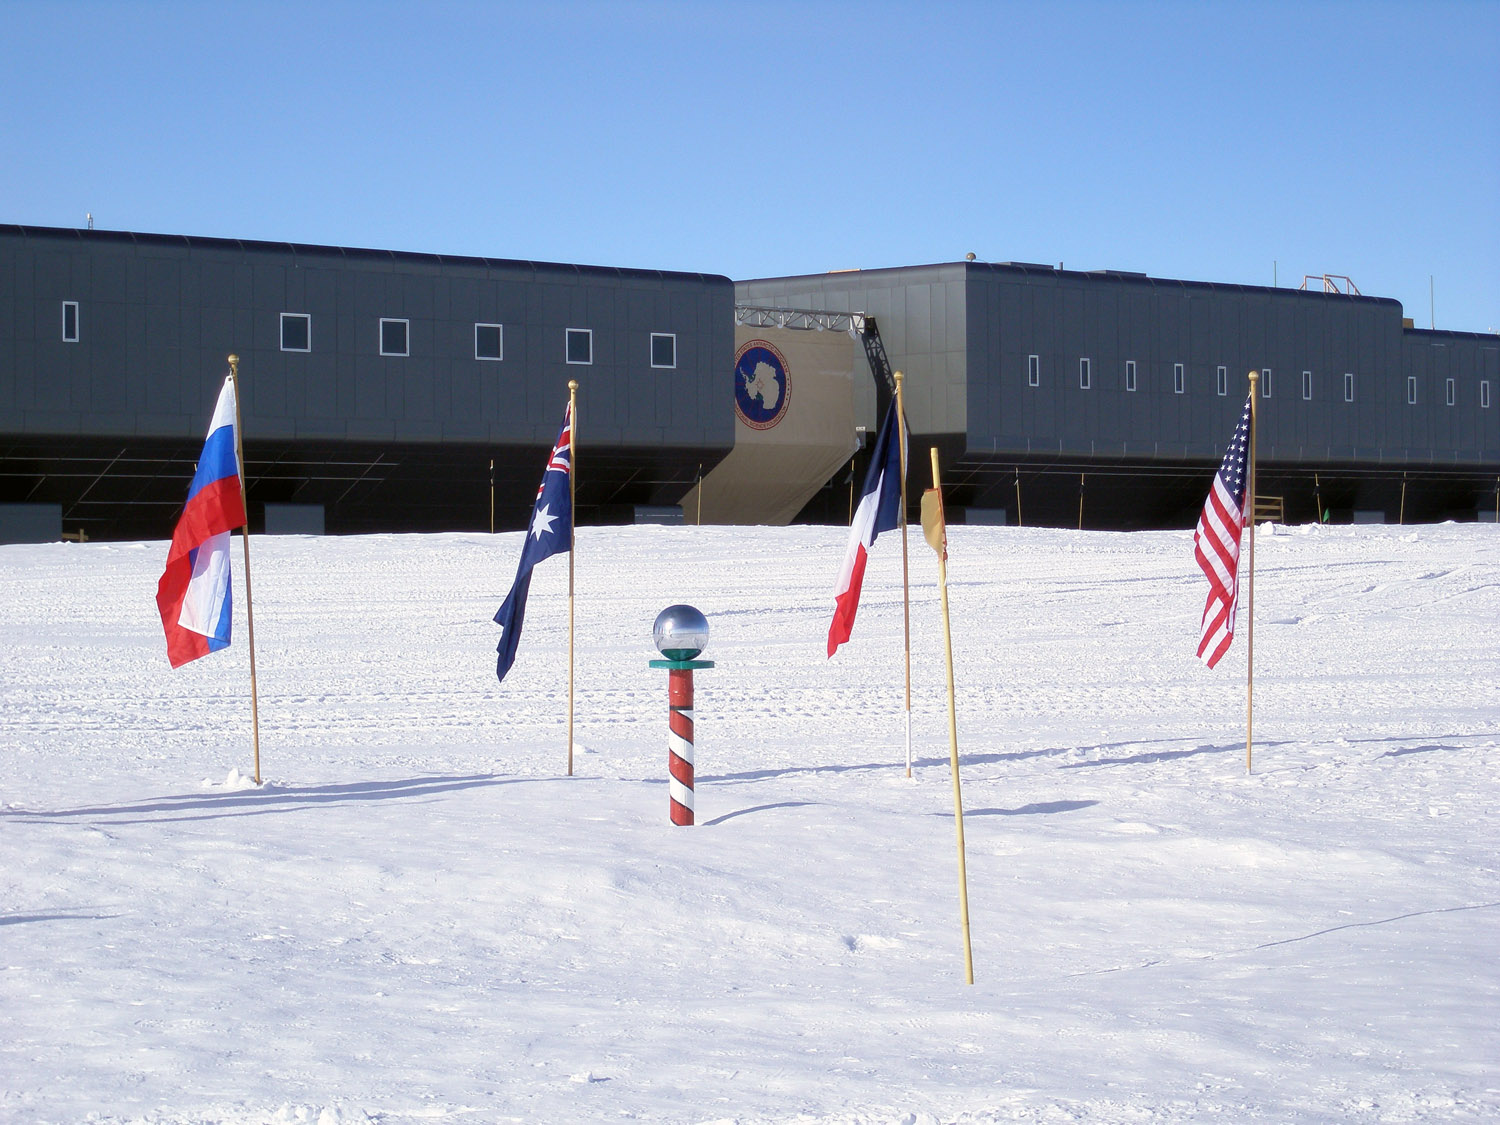 South Pole Station and Ceremonial South Pole